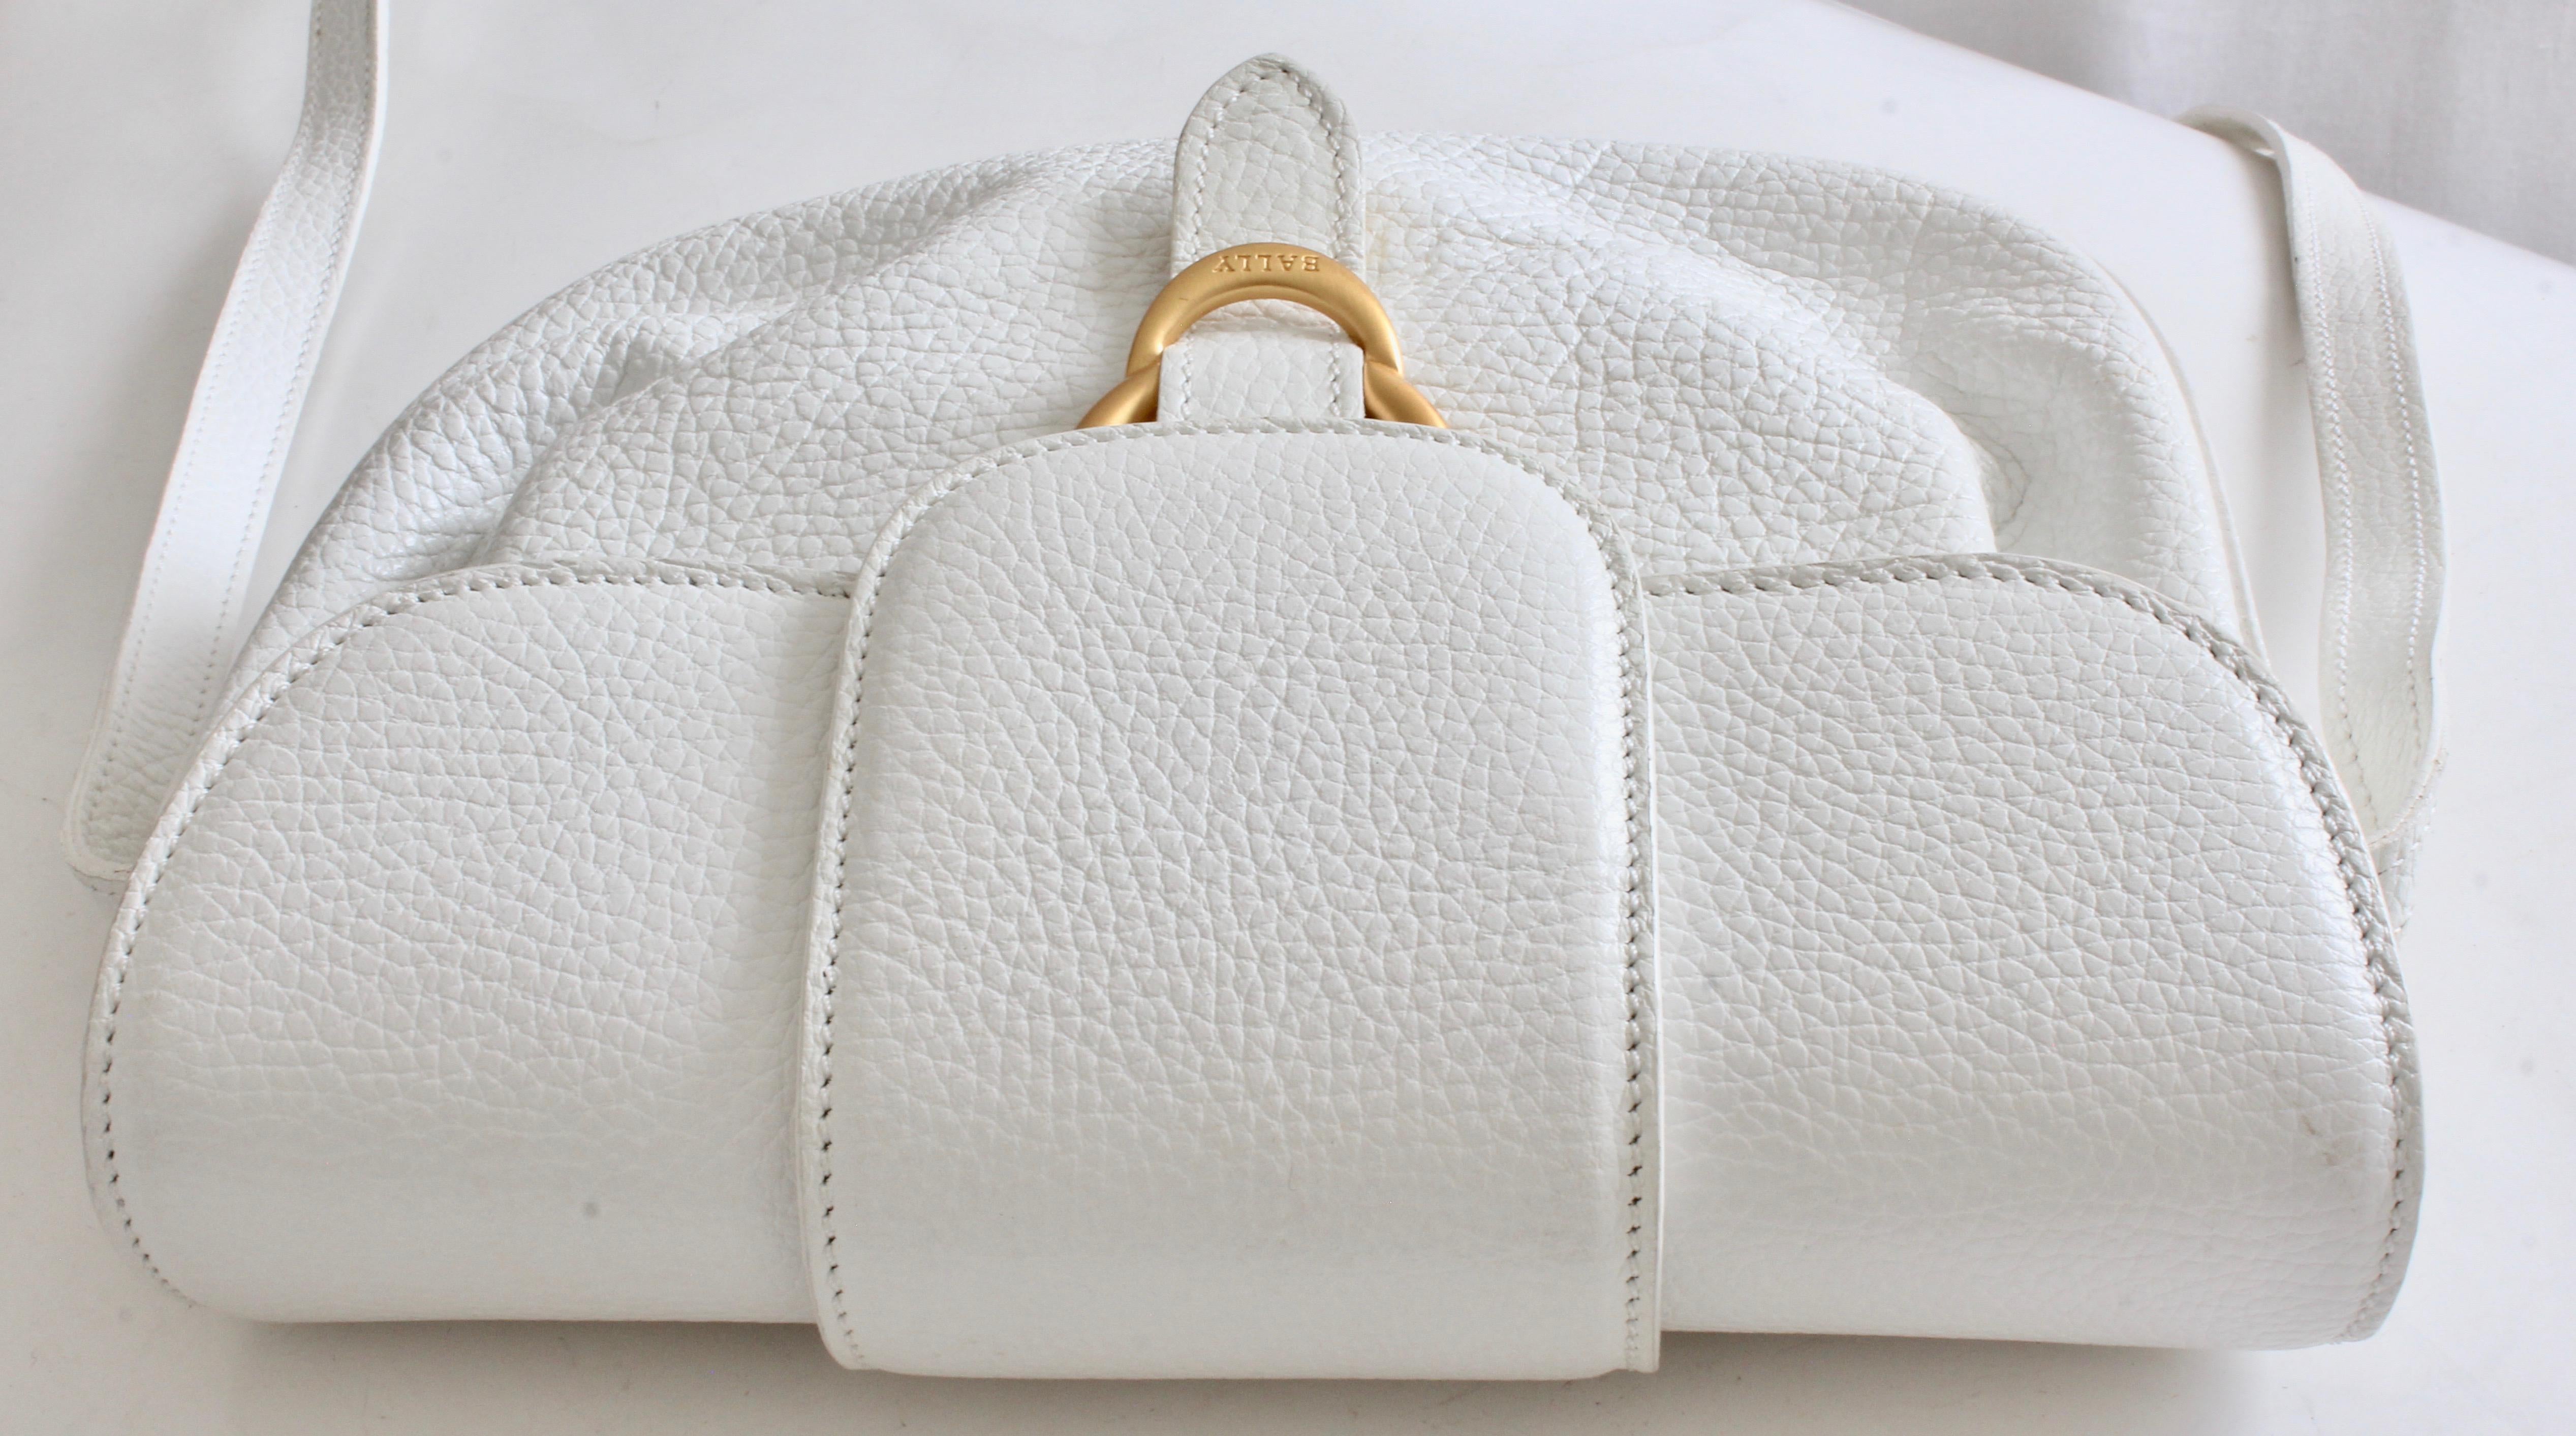 Bally Crossbody Bag White Pebbled Leather Top Flap Shoulder Bag Italy 1